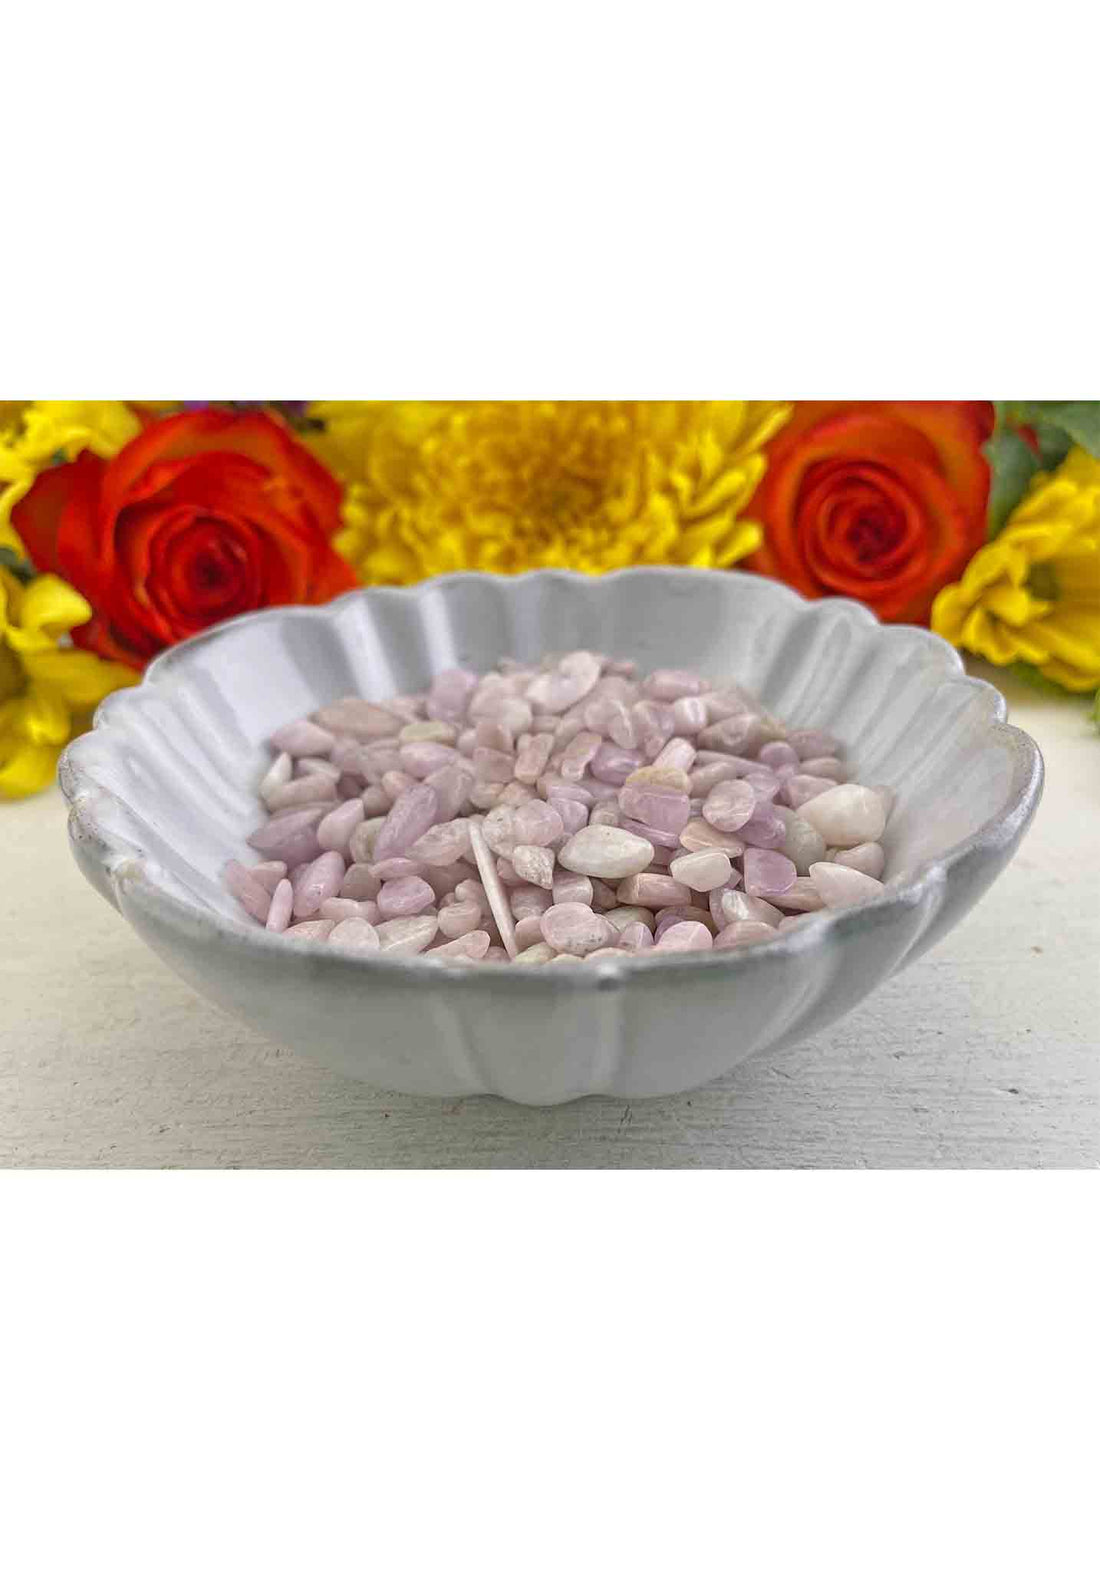 Four ounces of kunzite stone chips in bowl